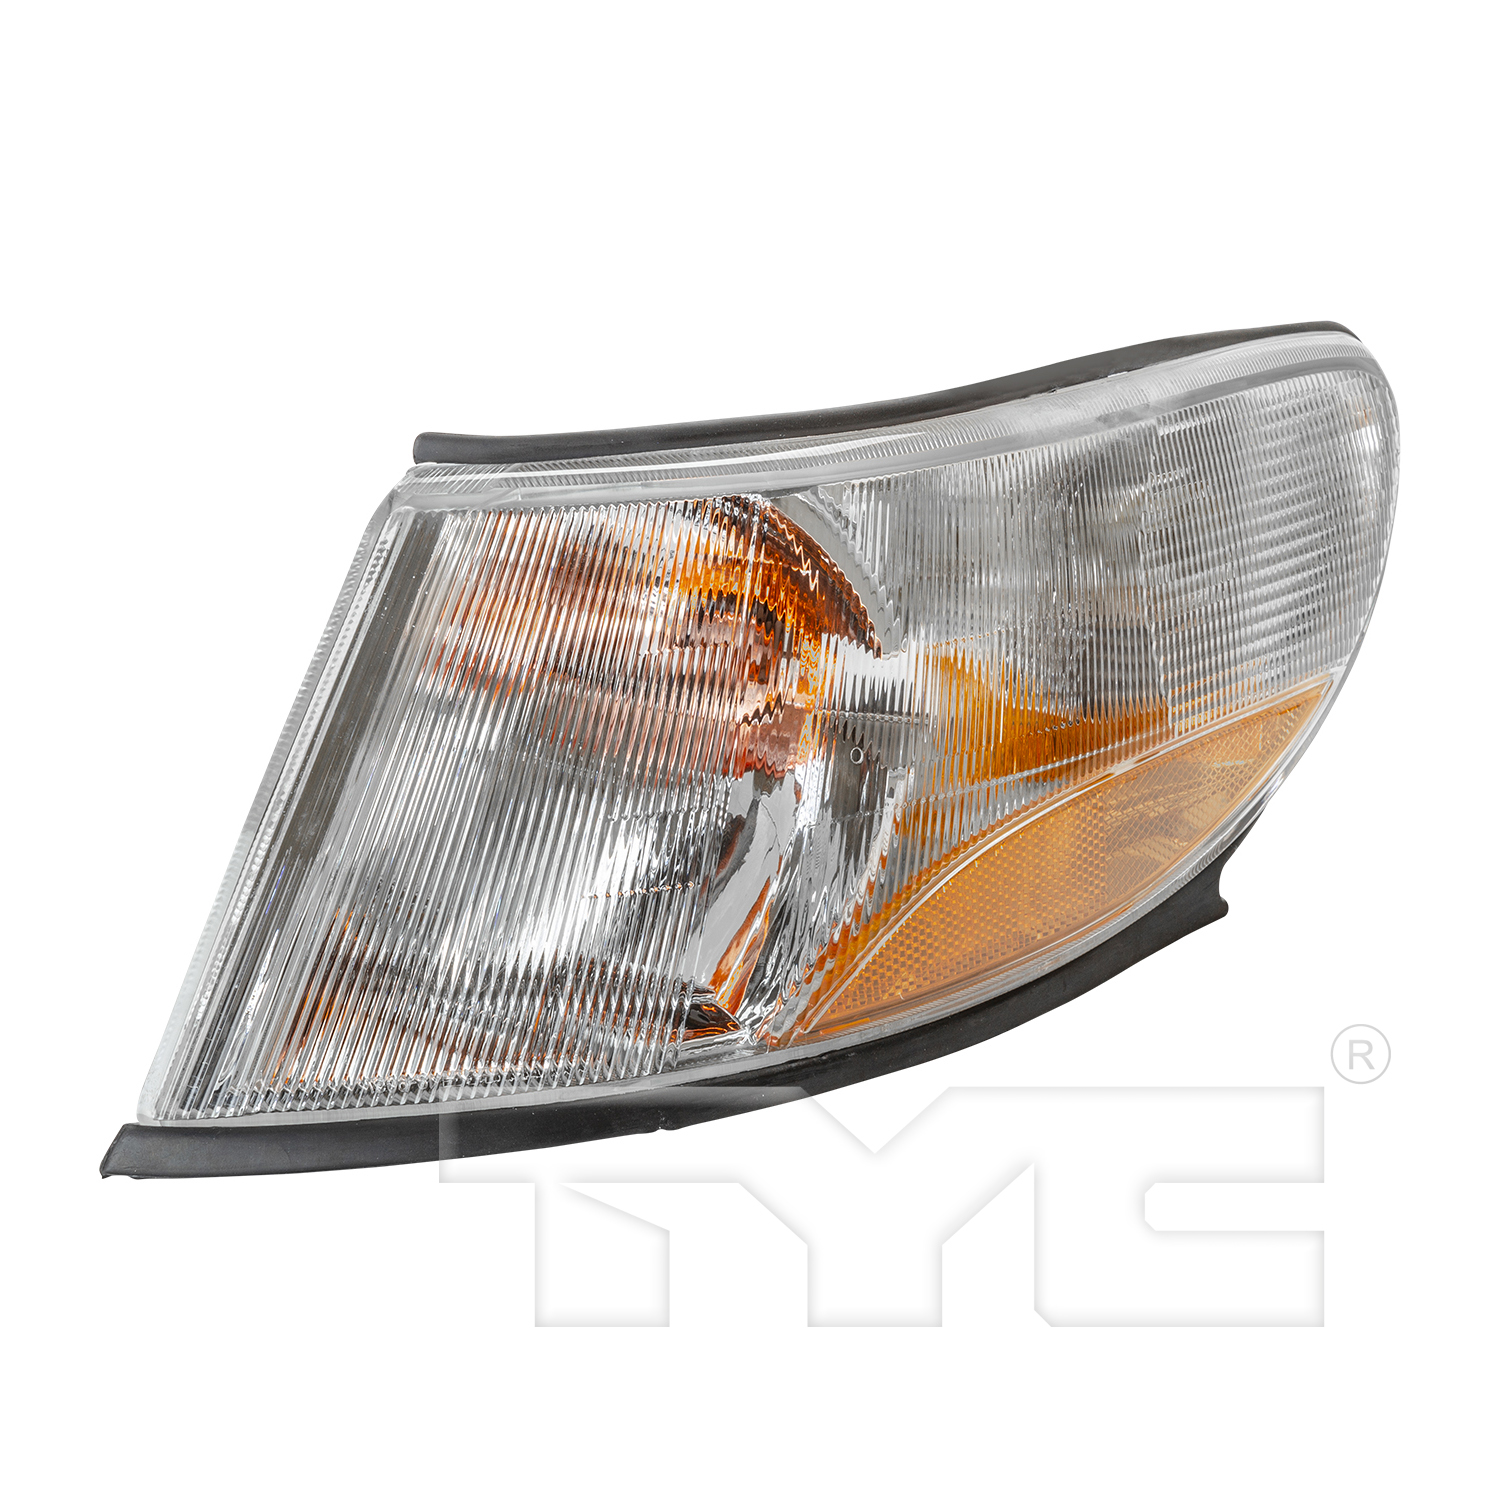 Aftermarket LAMPS for SAAB - 9-3, 9-3,99-02,LT Front signal lamp